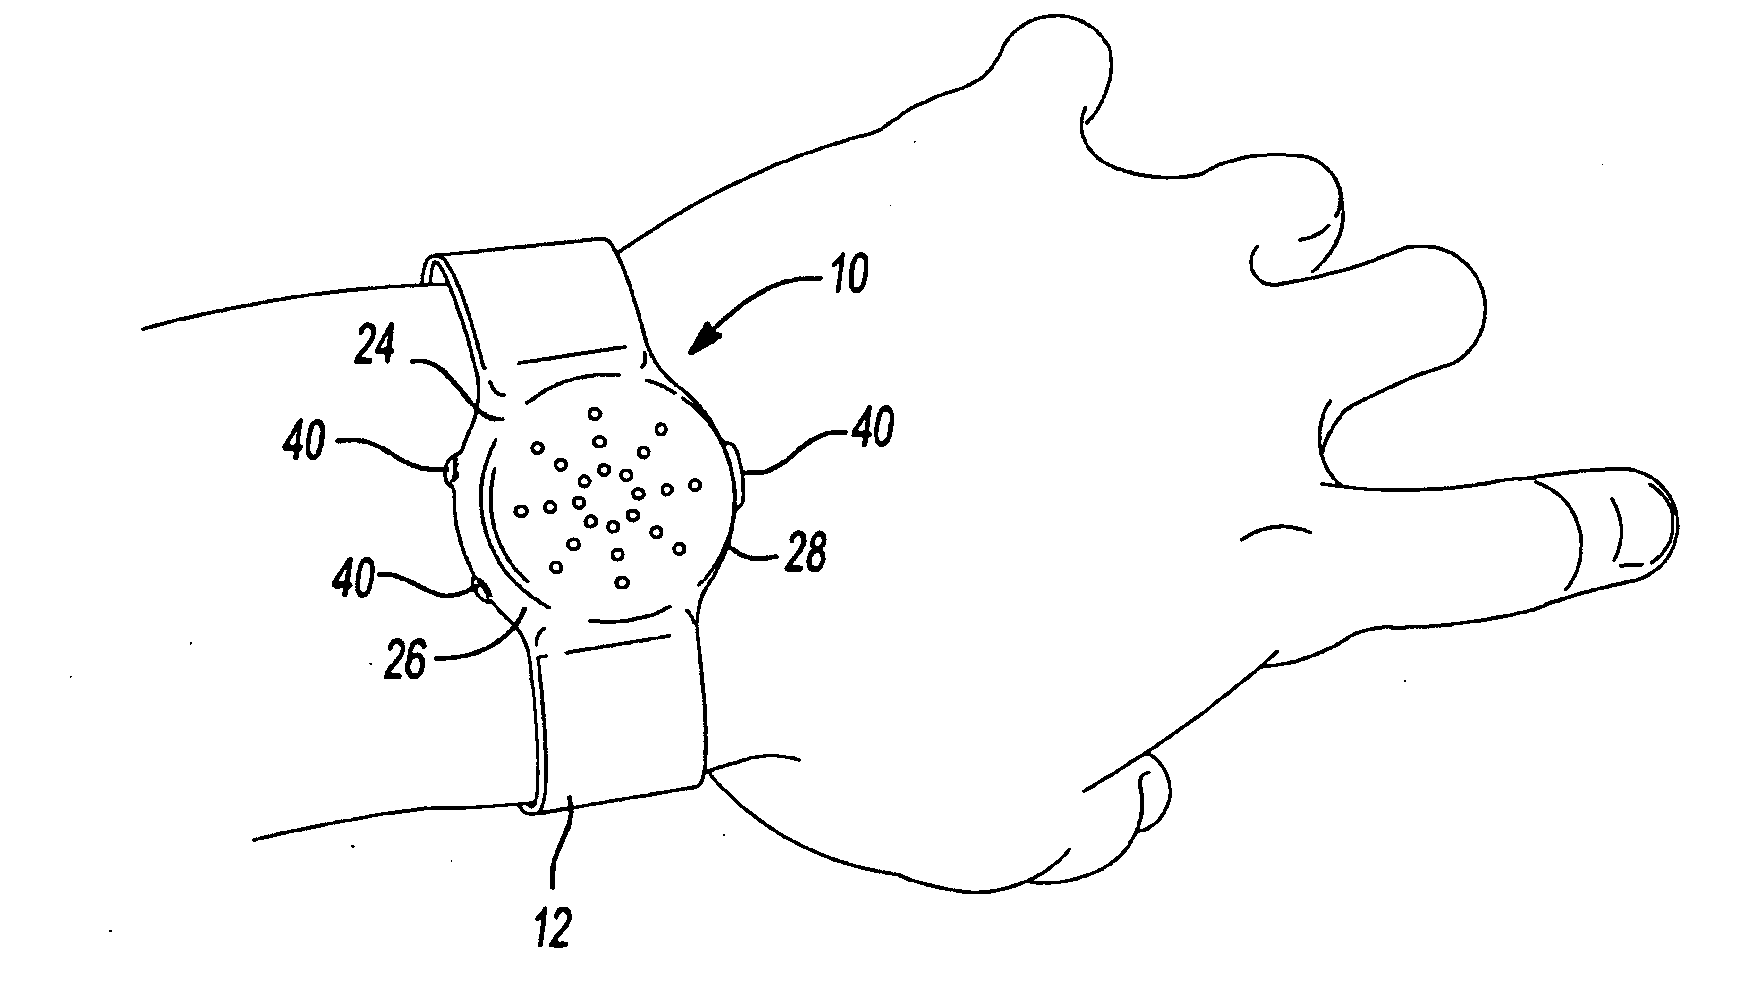 Sound recordable/playable device and method of use